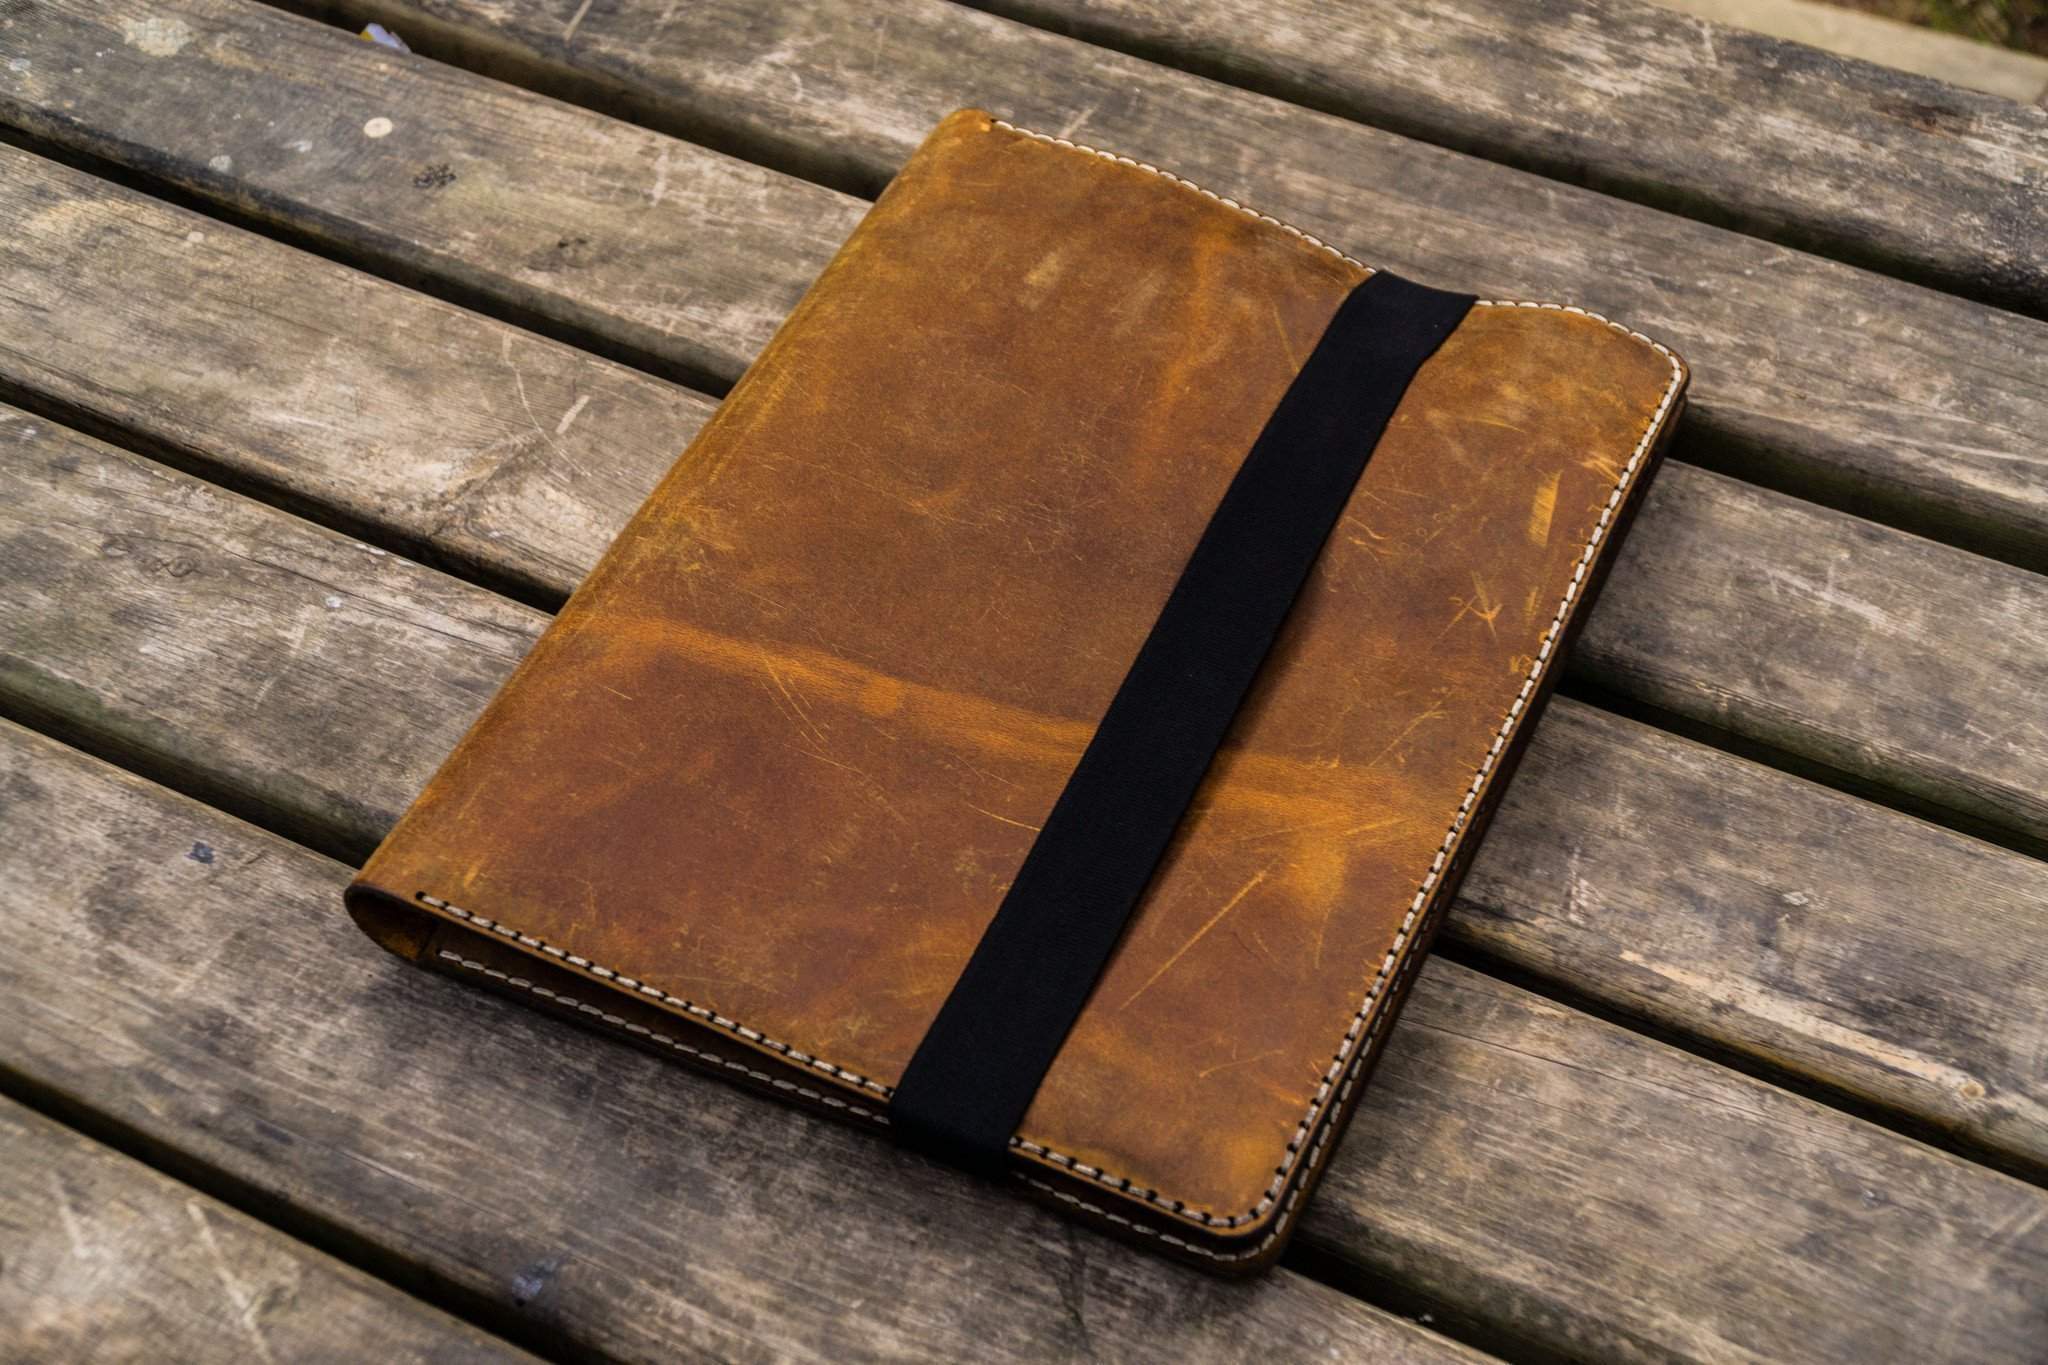 Simple Leather Organizer Folio Case for iPad Mini, Letter/A4 Paper, Chocolate Brown, Size: Large